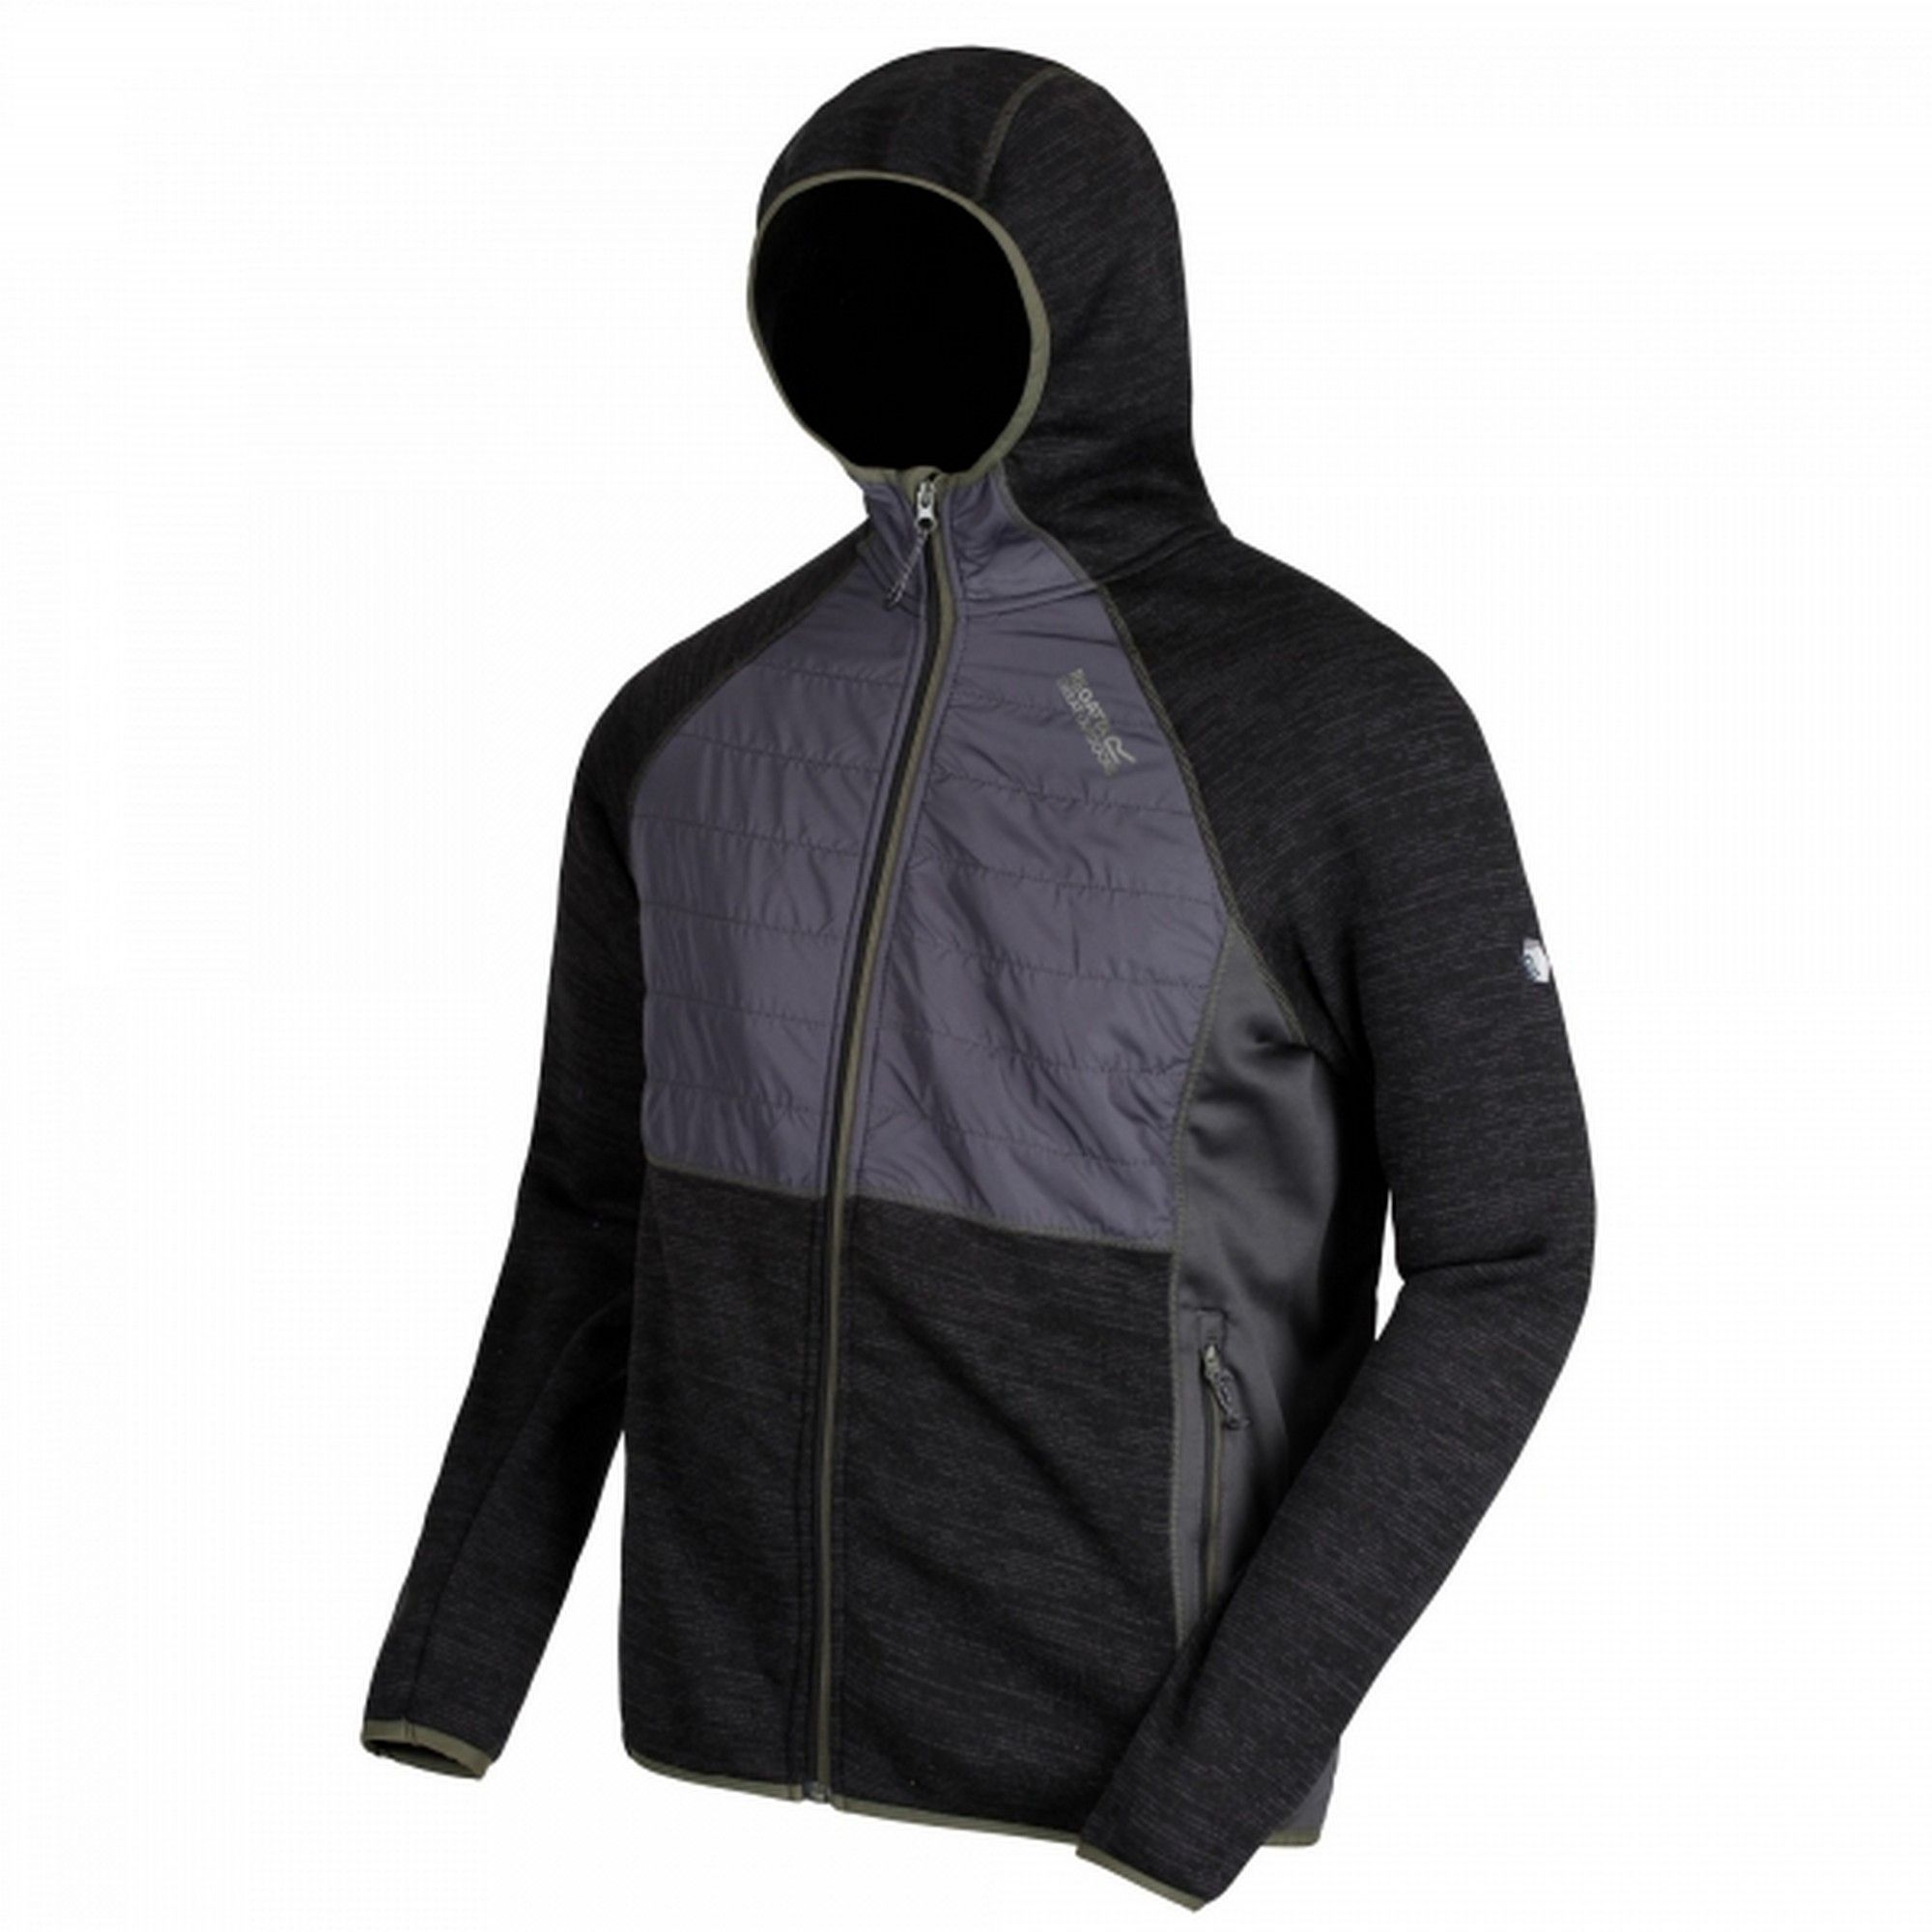 100% Polyester. Provides light weather protection and warmth for hiking and trekking. Streamlined by design, this performance mid layer is easily packed and layered under shells. Extol stretch fabric with water repellent finish. Stretch panels for increased freedom of movement. 2 zipped pockets. Attached hood with stretch binding.